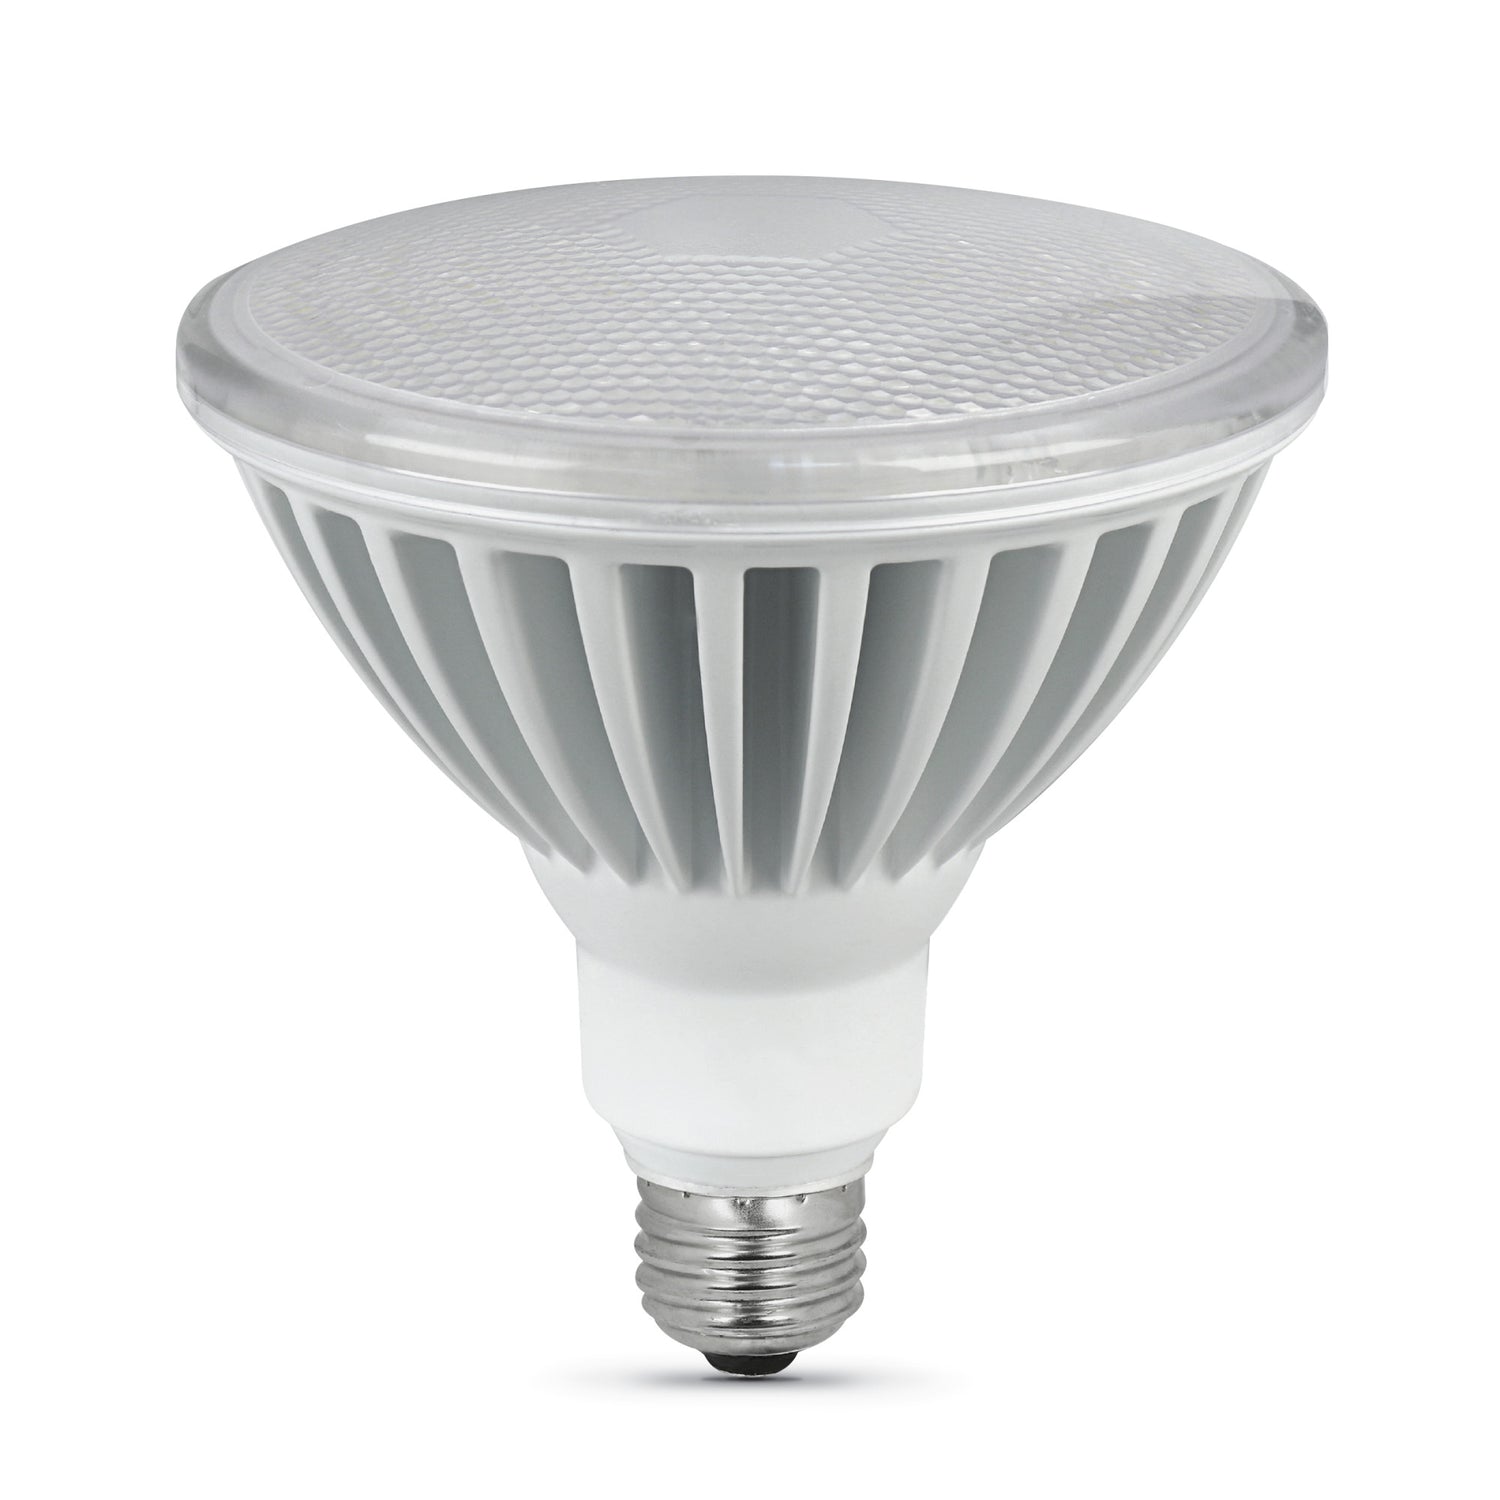 40W (250W Replacement) Daylight (5000K) E26 Base Dimmable PAR38 Reflector High Output LED